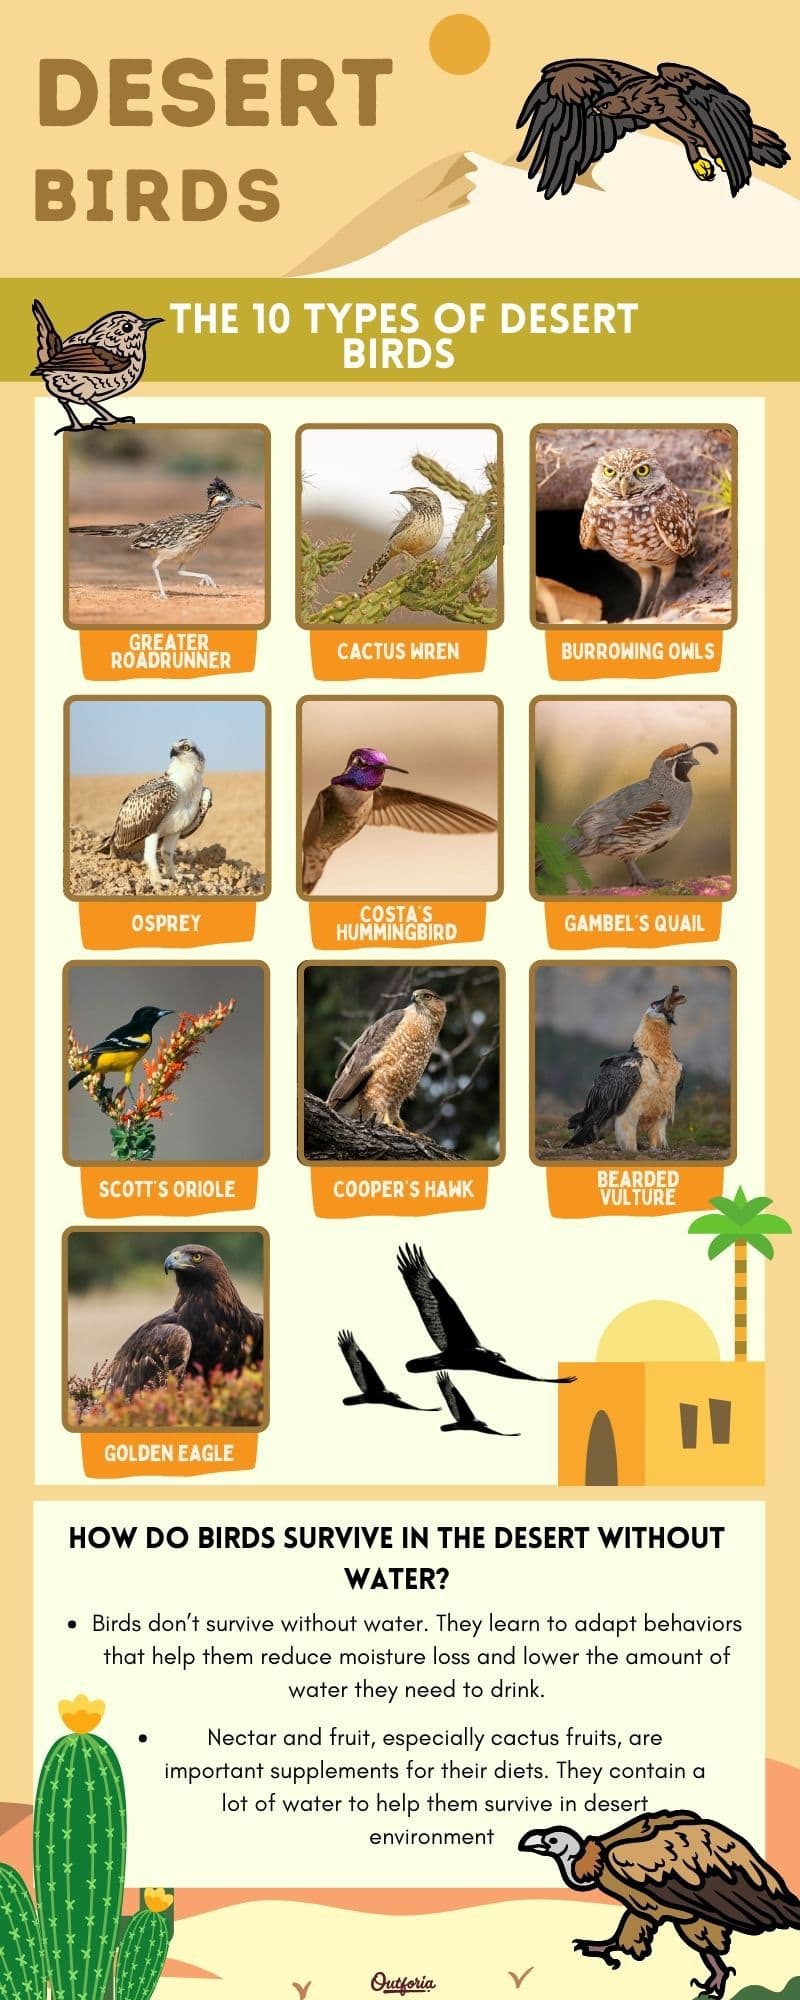 desert birds chart with images and names